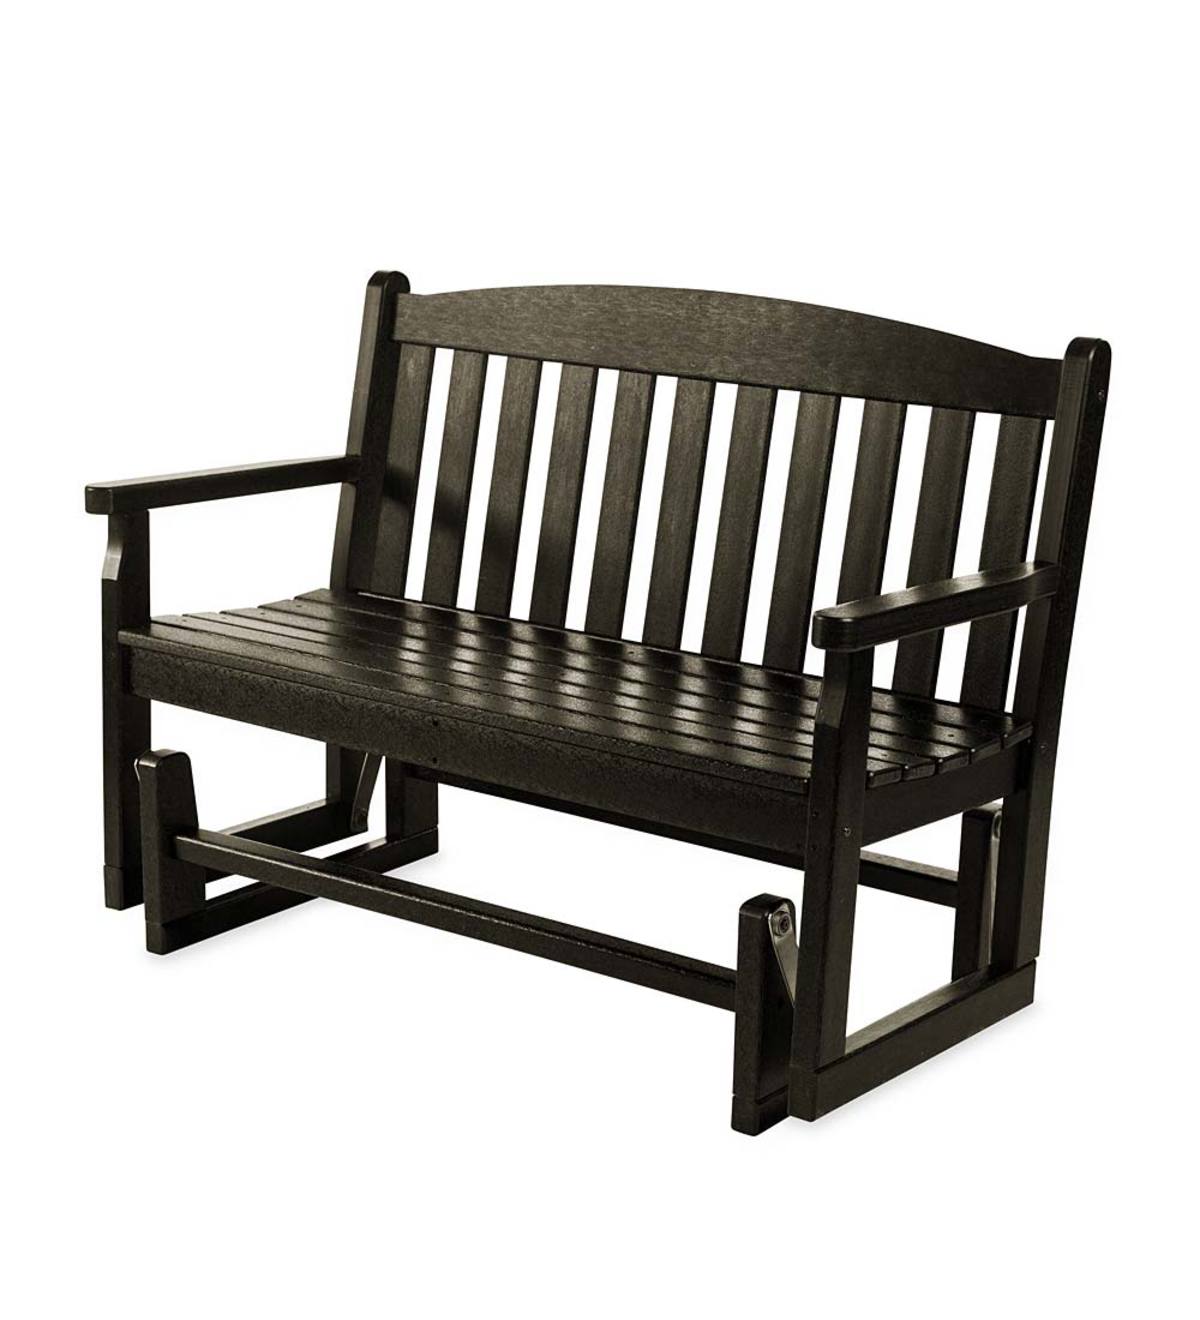 Polywood Outdoor Glider Bench Black Plowhearth